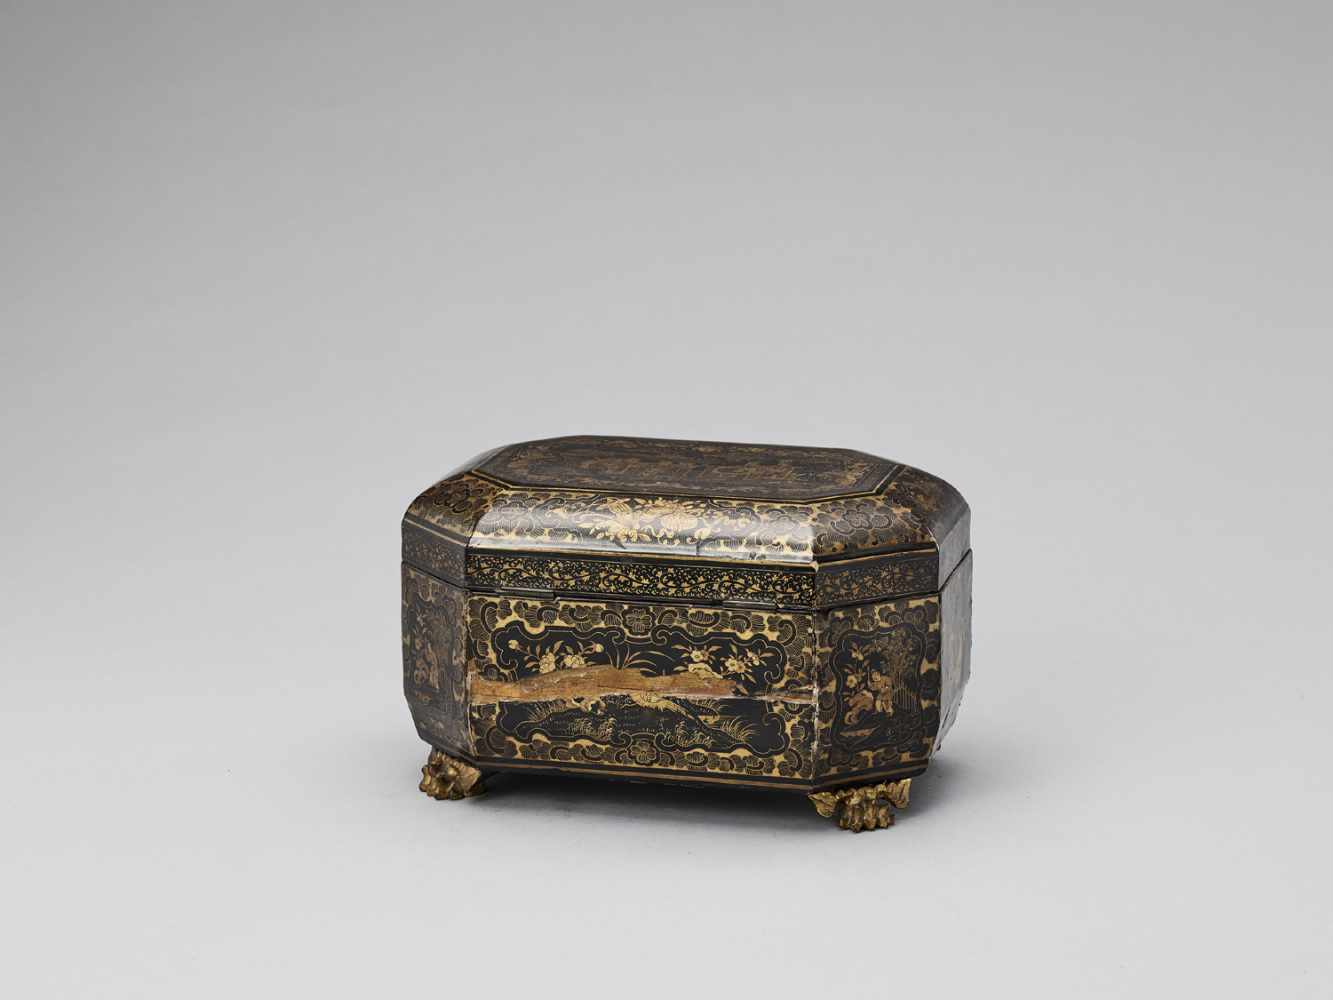 A CANTON LACQUER HEXAGONAL TEA CADDY WITH ORIGINAL TEA CONTAINERS, QING - Image 6 of 8